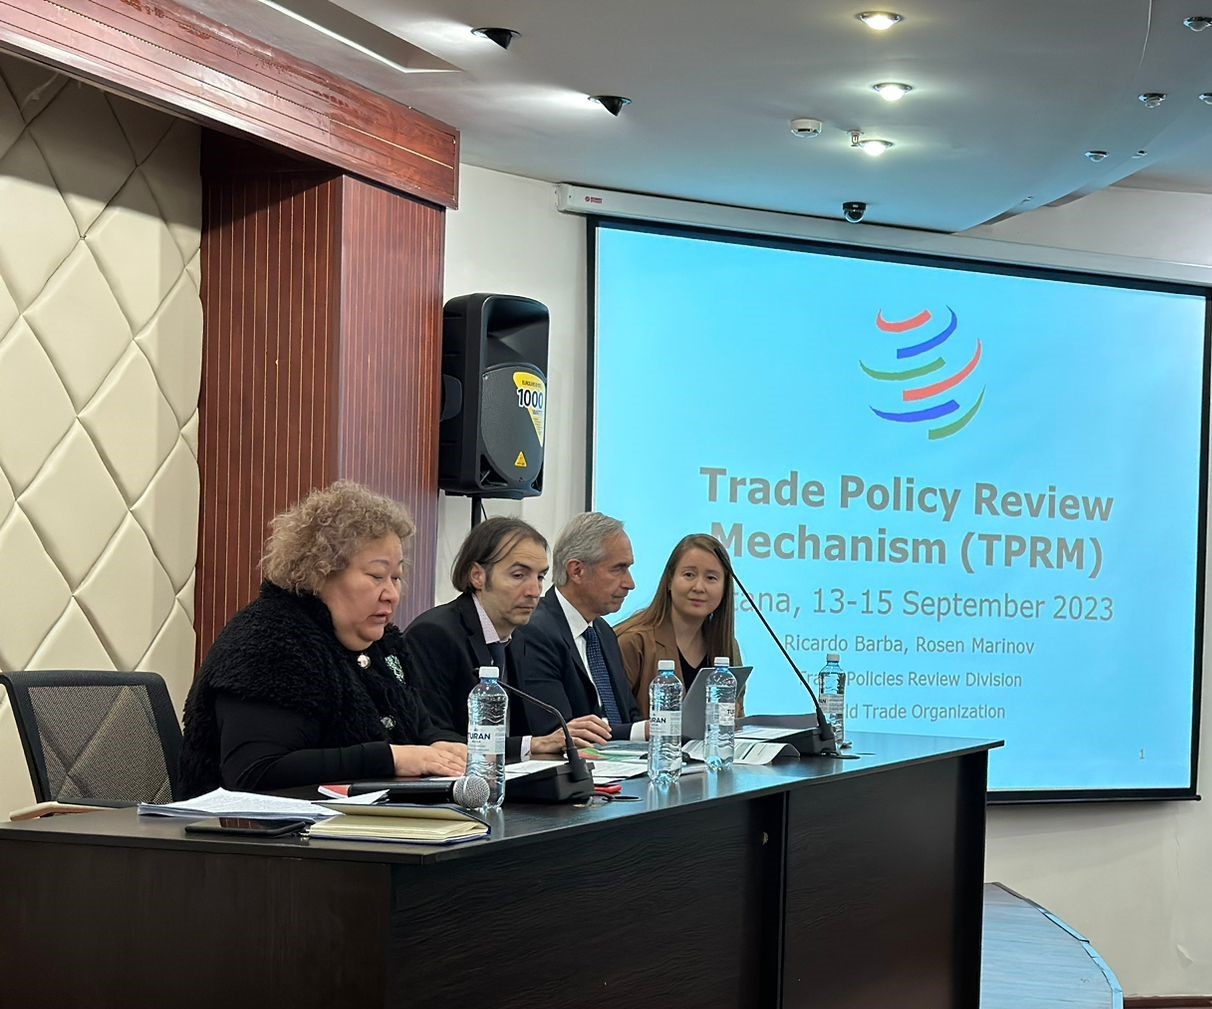 Kazakhstan has started preparing the first Trade Policy Review within the framework of its WTO membership